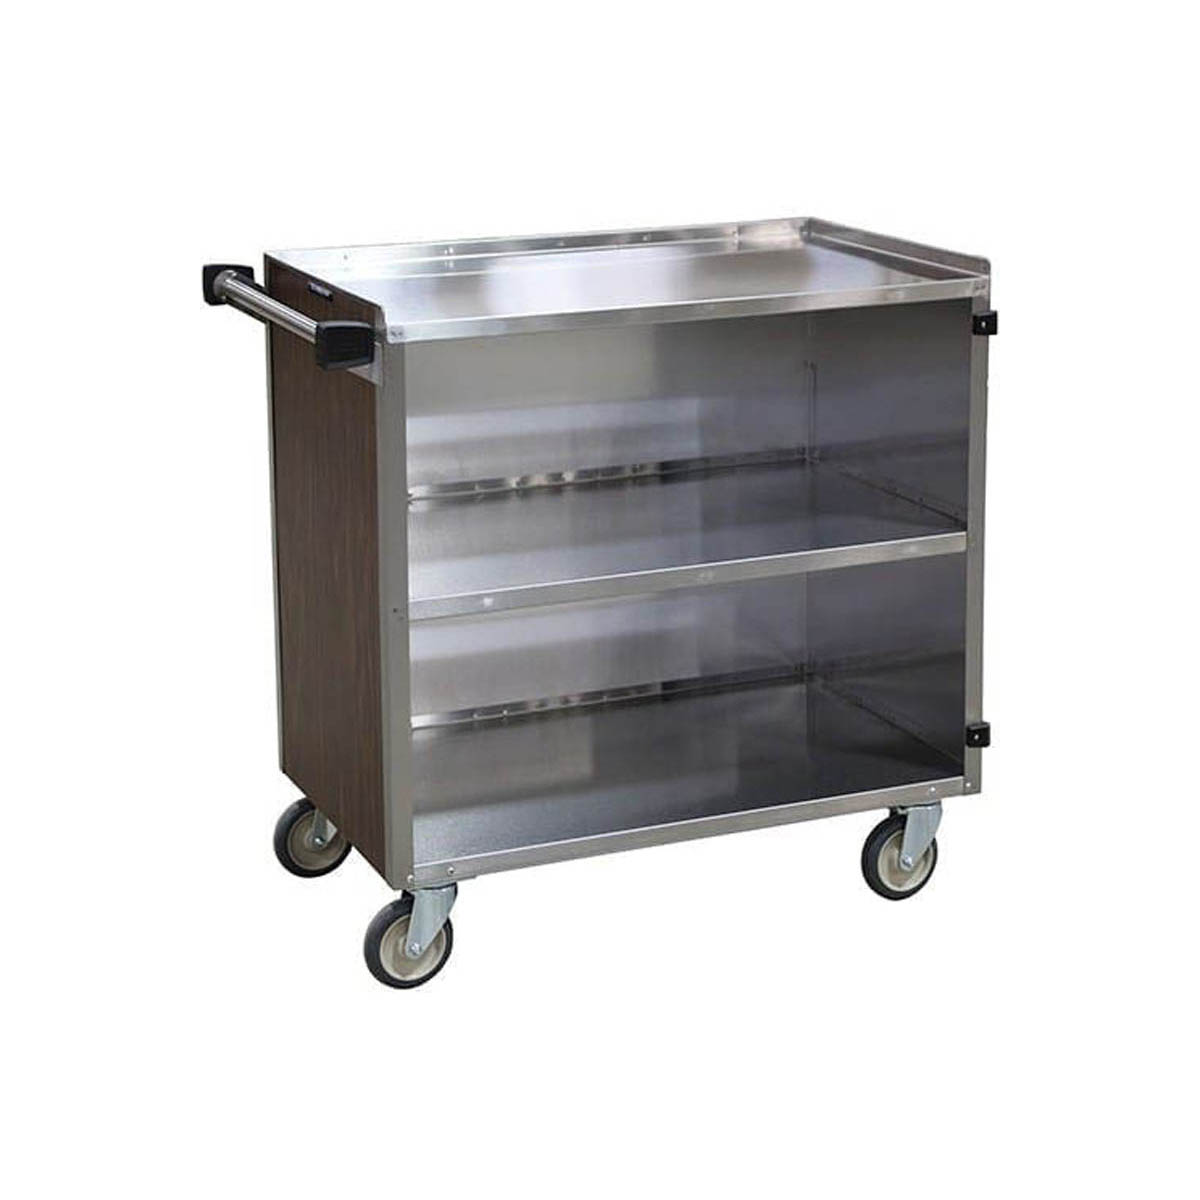 Lakeside 644 3 Shelves Stainless Steel Enclosed Bussing Cart - 500 Lbs. Capacity